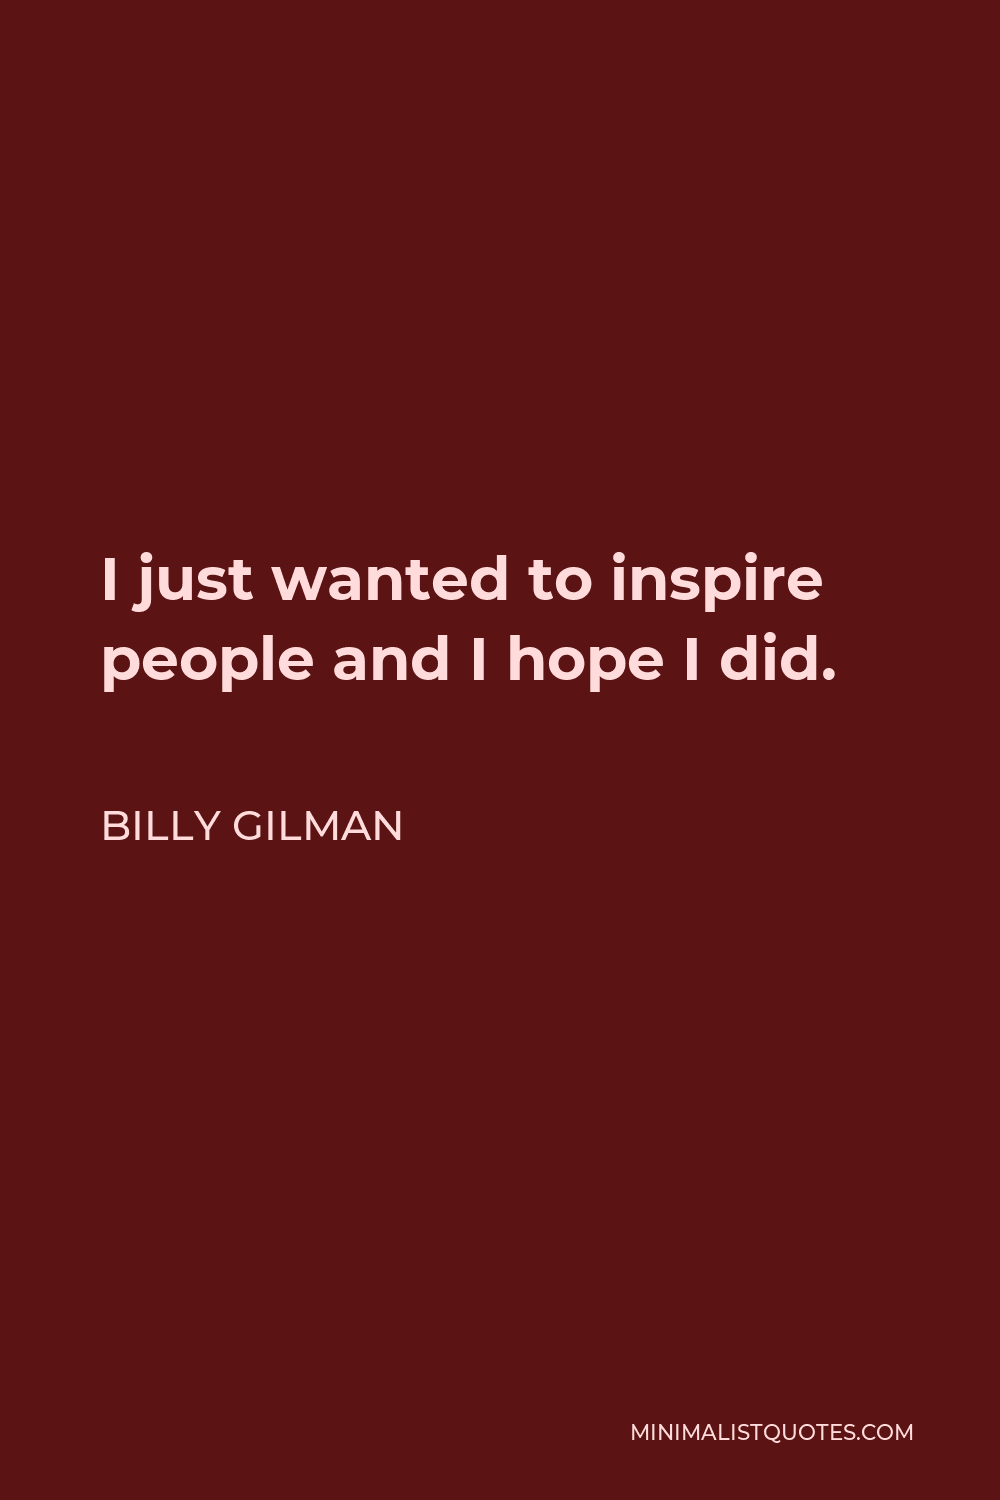 Billy Gilman Quote - I just wanted to inspire people and I hope I did.